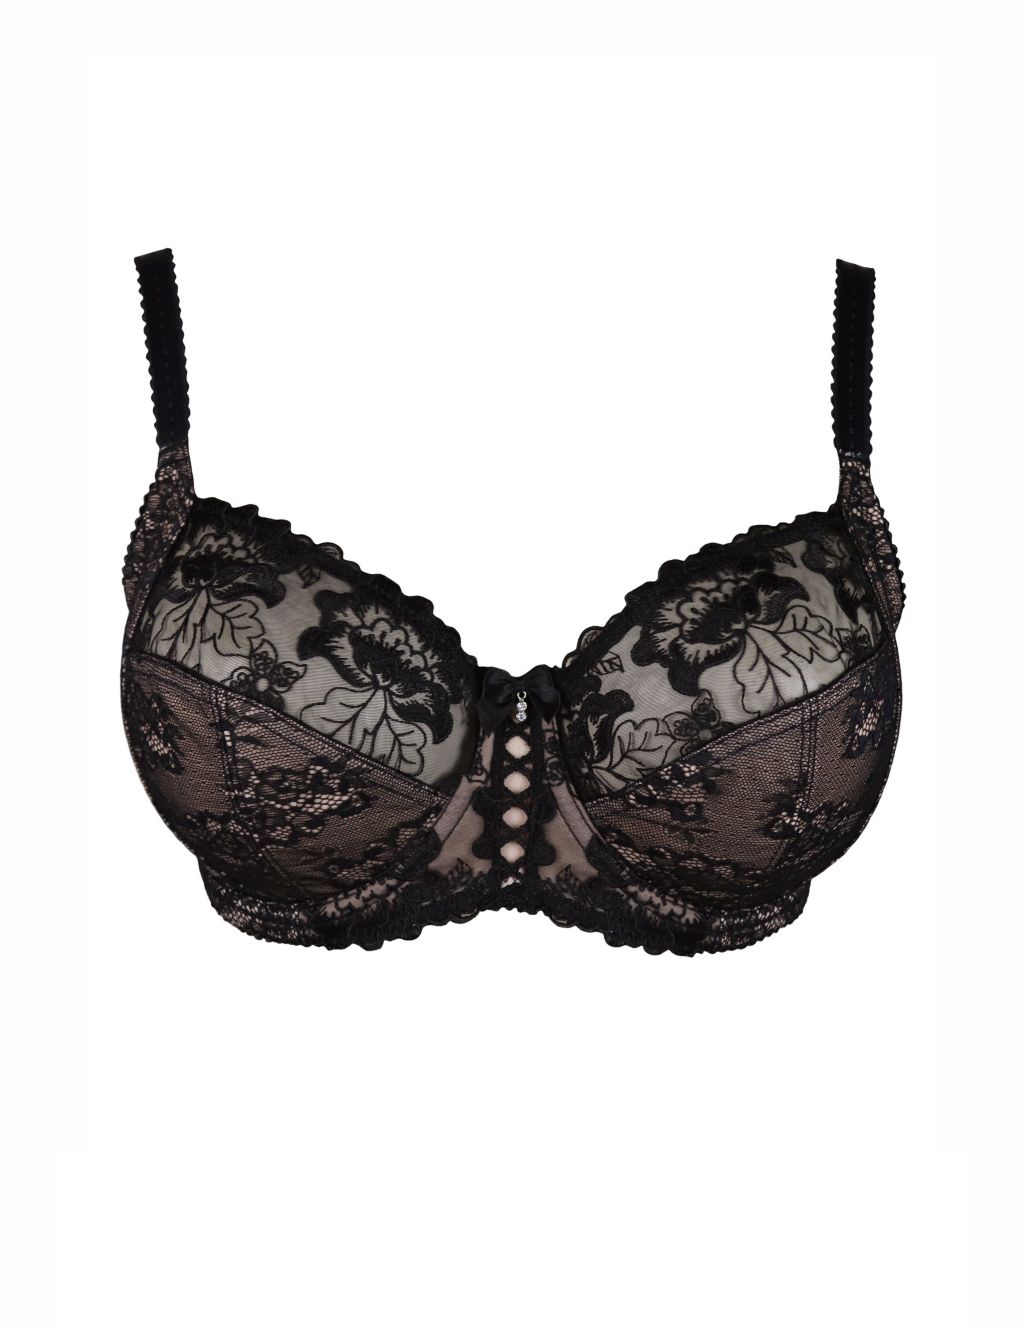 Sofia Lace Embroidered Side Support Bra DD-J image 2